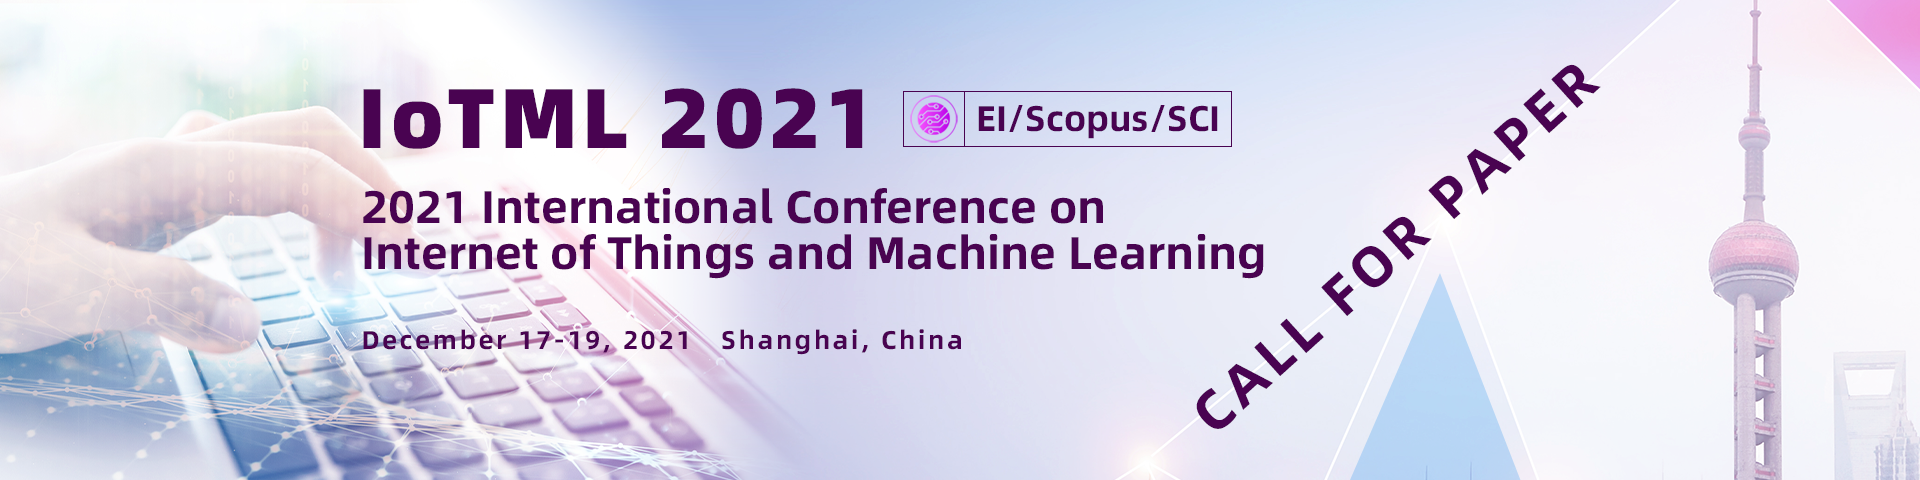 2021 International Conference on Electronic Information Engineering and Computer Technology（EIECT 2021）, Kunming, Yunnan, China